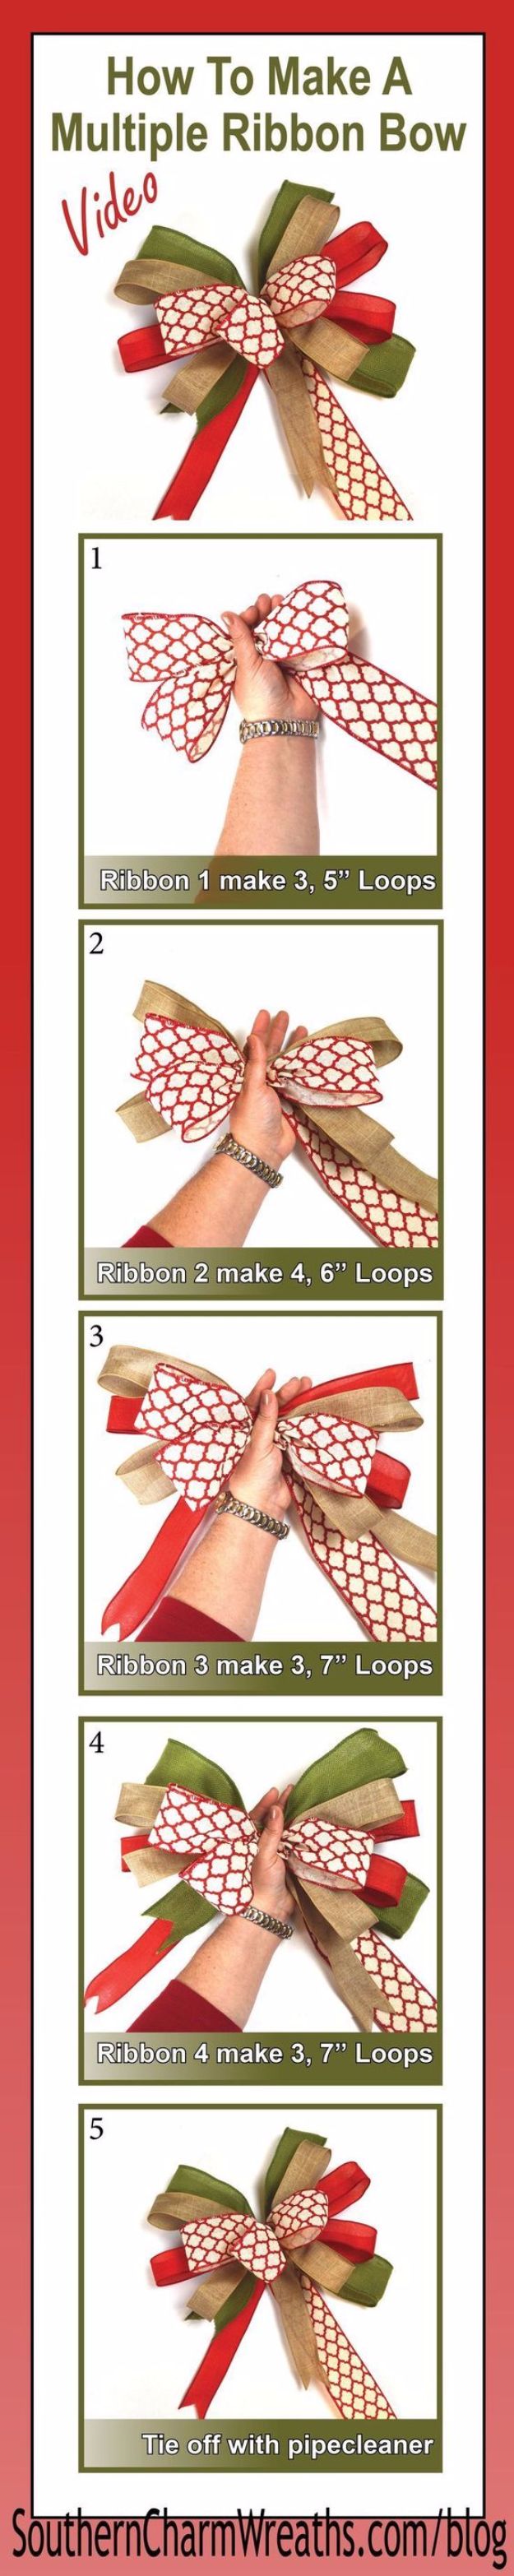 Creative Bows For Packages - Make a Bow with Multiple Ribbons - Make DIY Bows for Christmas Presents and Holiday Gifts - Cute and Easy Ideas for Making Your Own Bows and Ribbons - Step by Step Tutorials and Instructions for Tying A Bow - Cheap and Crafty Gift Wrapping Ideas on A Budget #diy #gifts #giftwrapping #christmasgifts